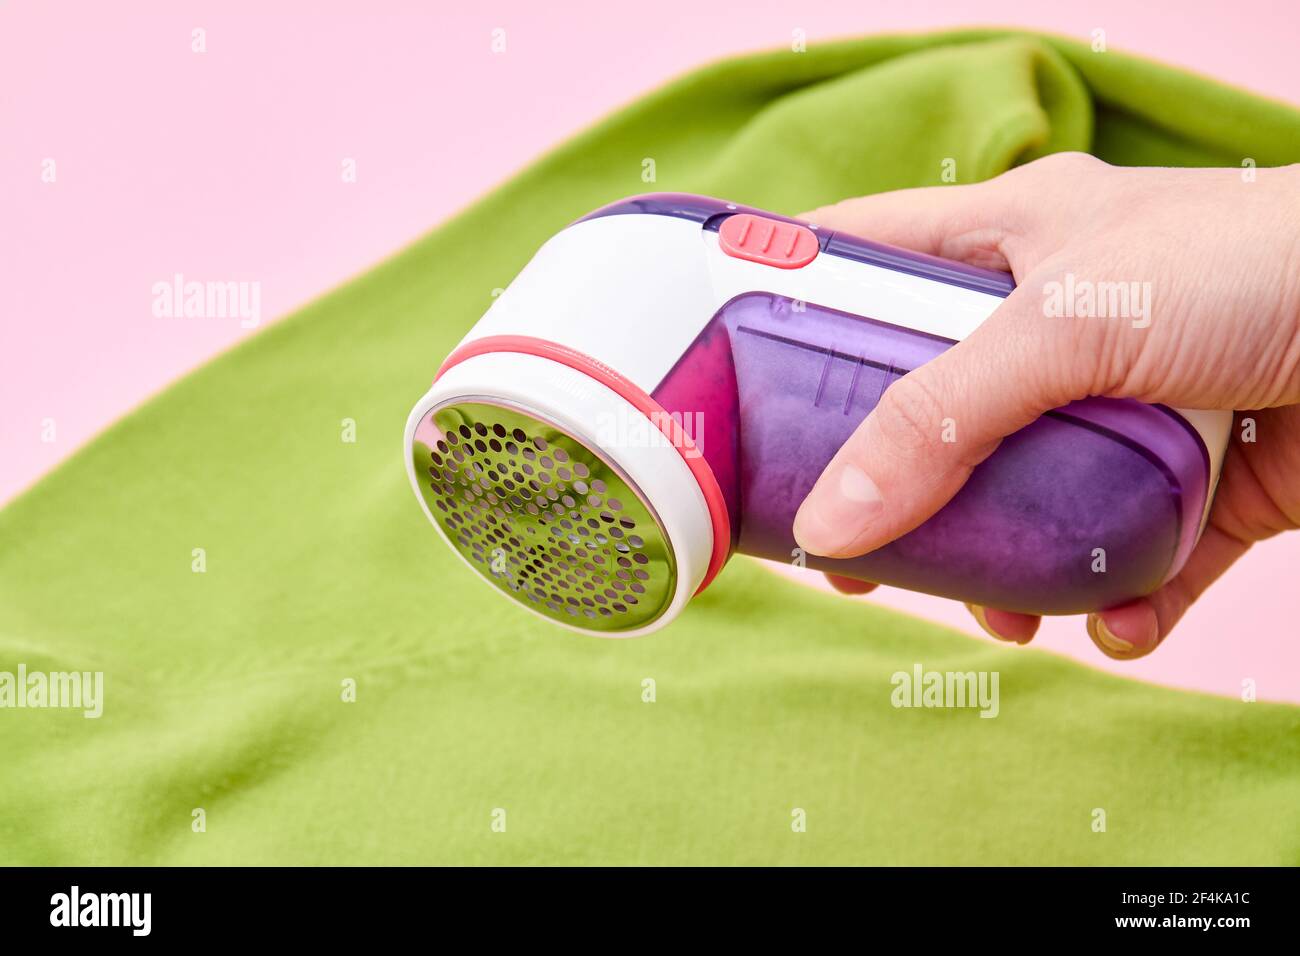 A wooman using Fabric shaver removes fabric pills from garments. Close-up, selective focus Stock Photo